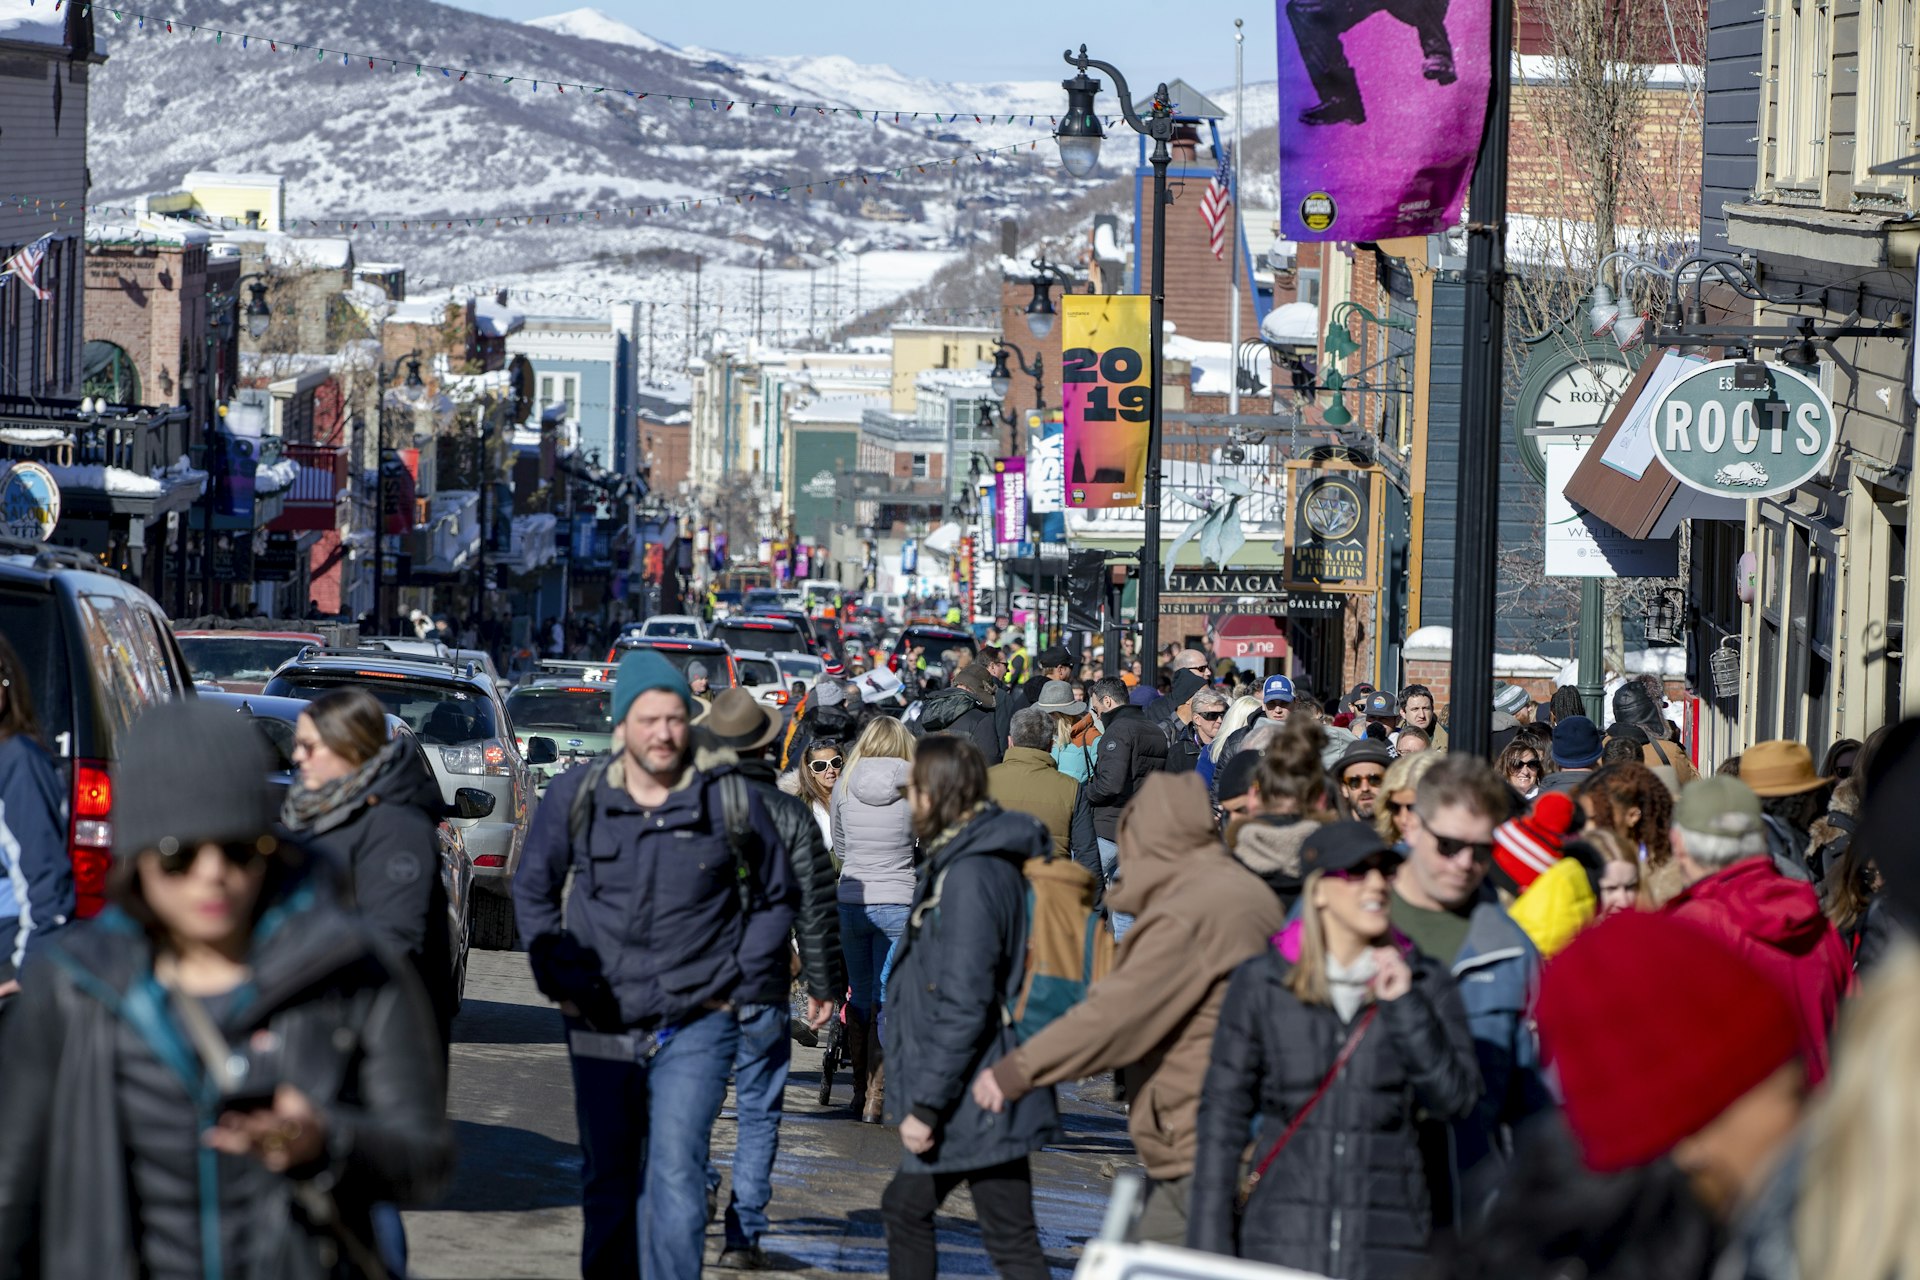 A crowd of Sundance festival goers in winter goats, hats, and sunglasses crowd Main Street in Park City, where the lampposts have yellow and pink banners reading 2019 for last years festival